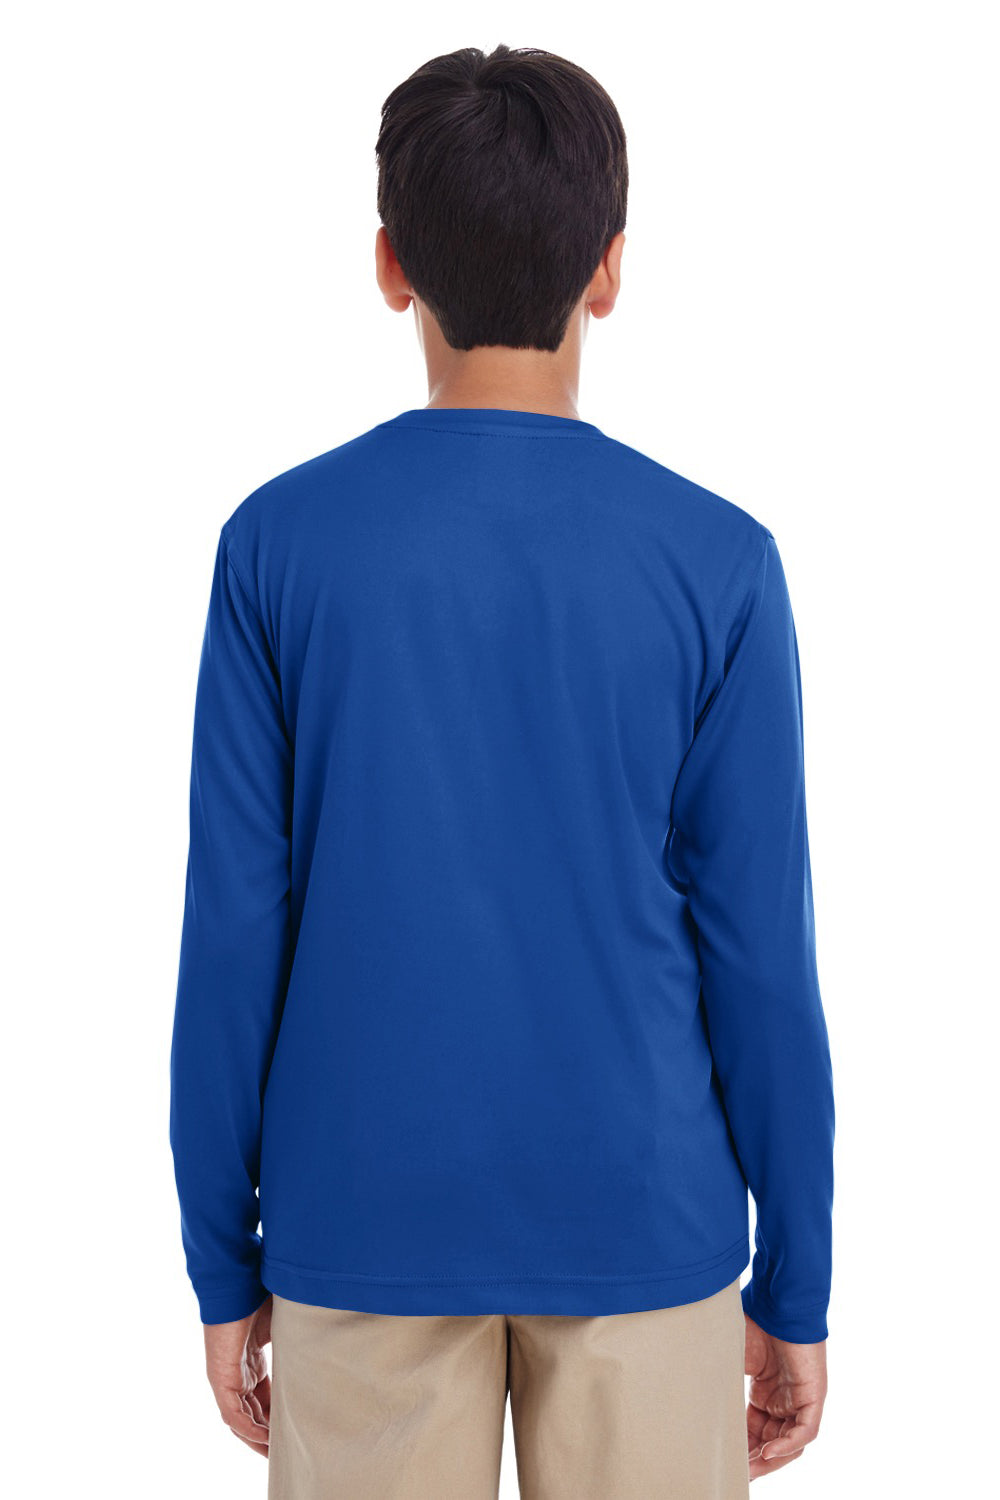 UltraClub 8622Y Youth Cool & Dry Performance Moisture Wicking Long Sleeve Crewneck T-Shirt Royal Blue Back